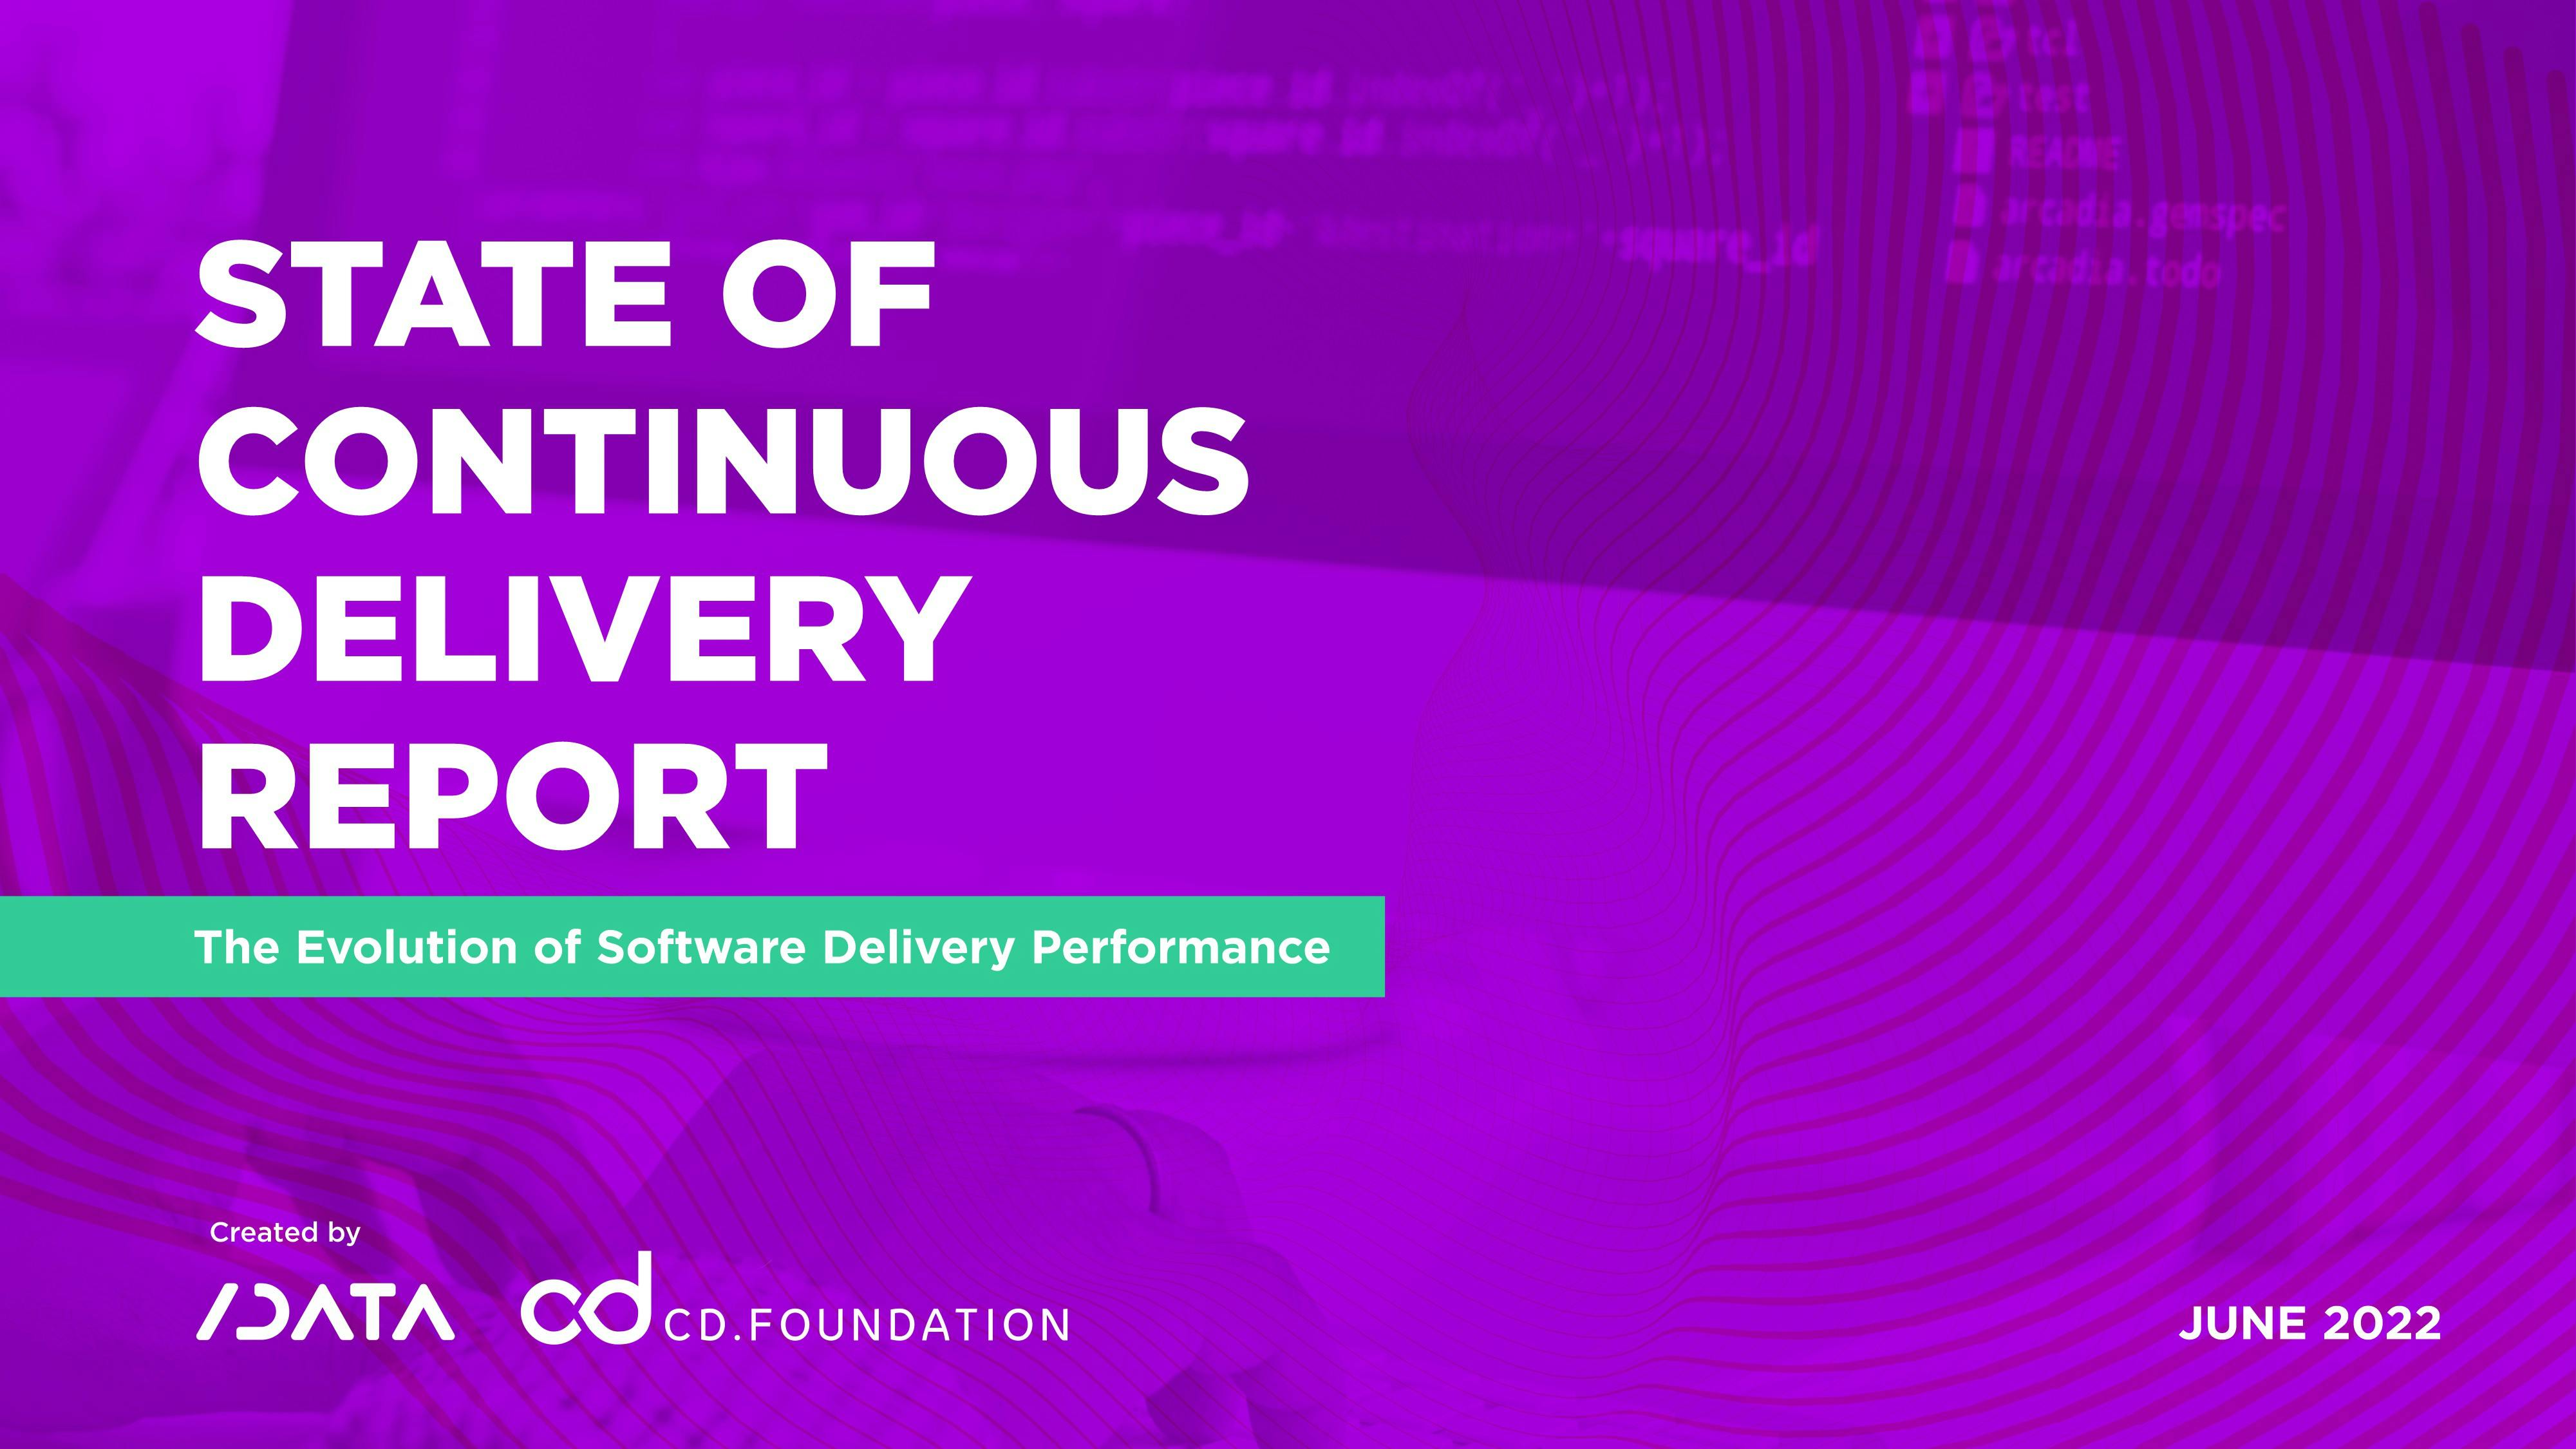 The State of Continuous Delivery Report